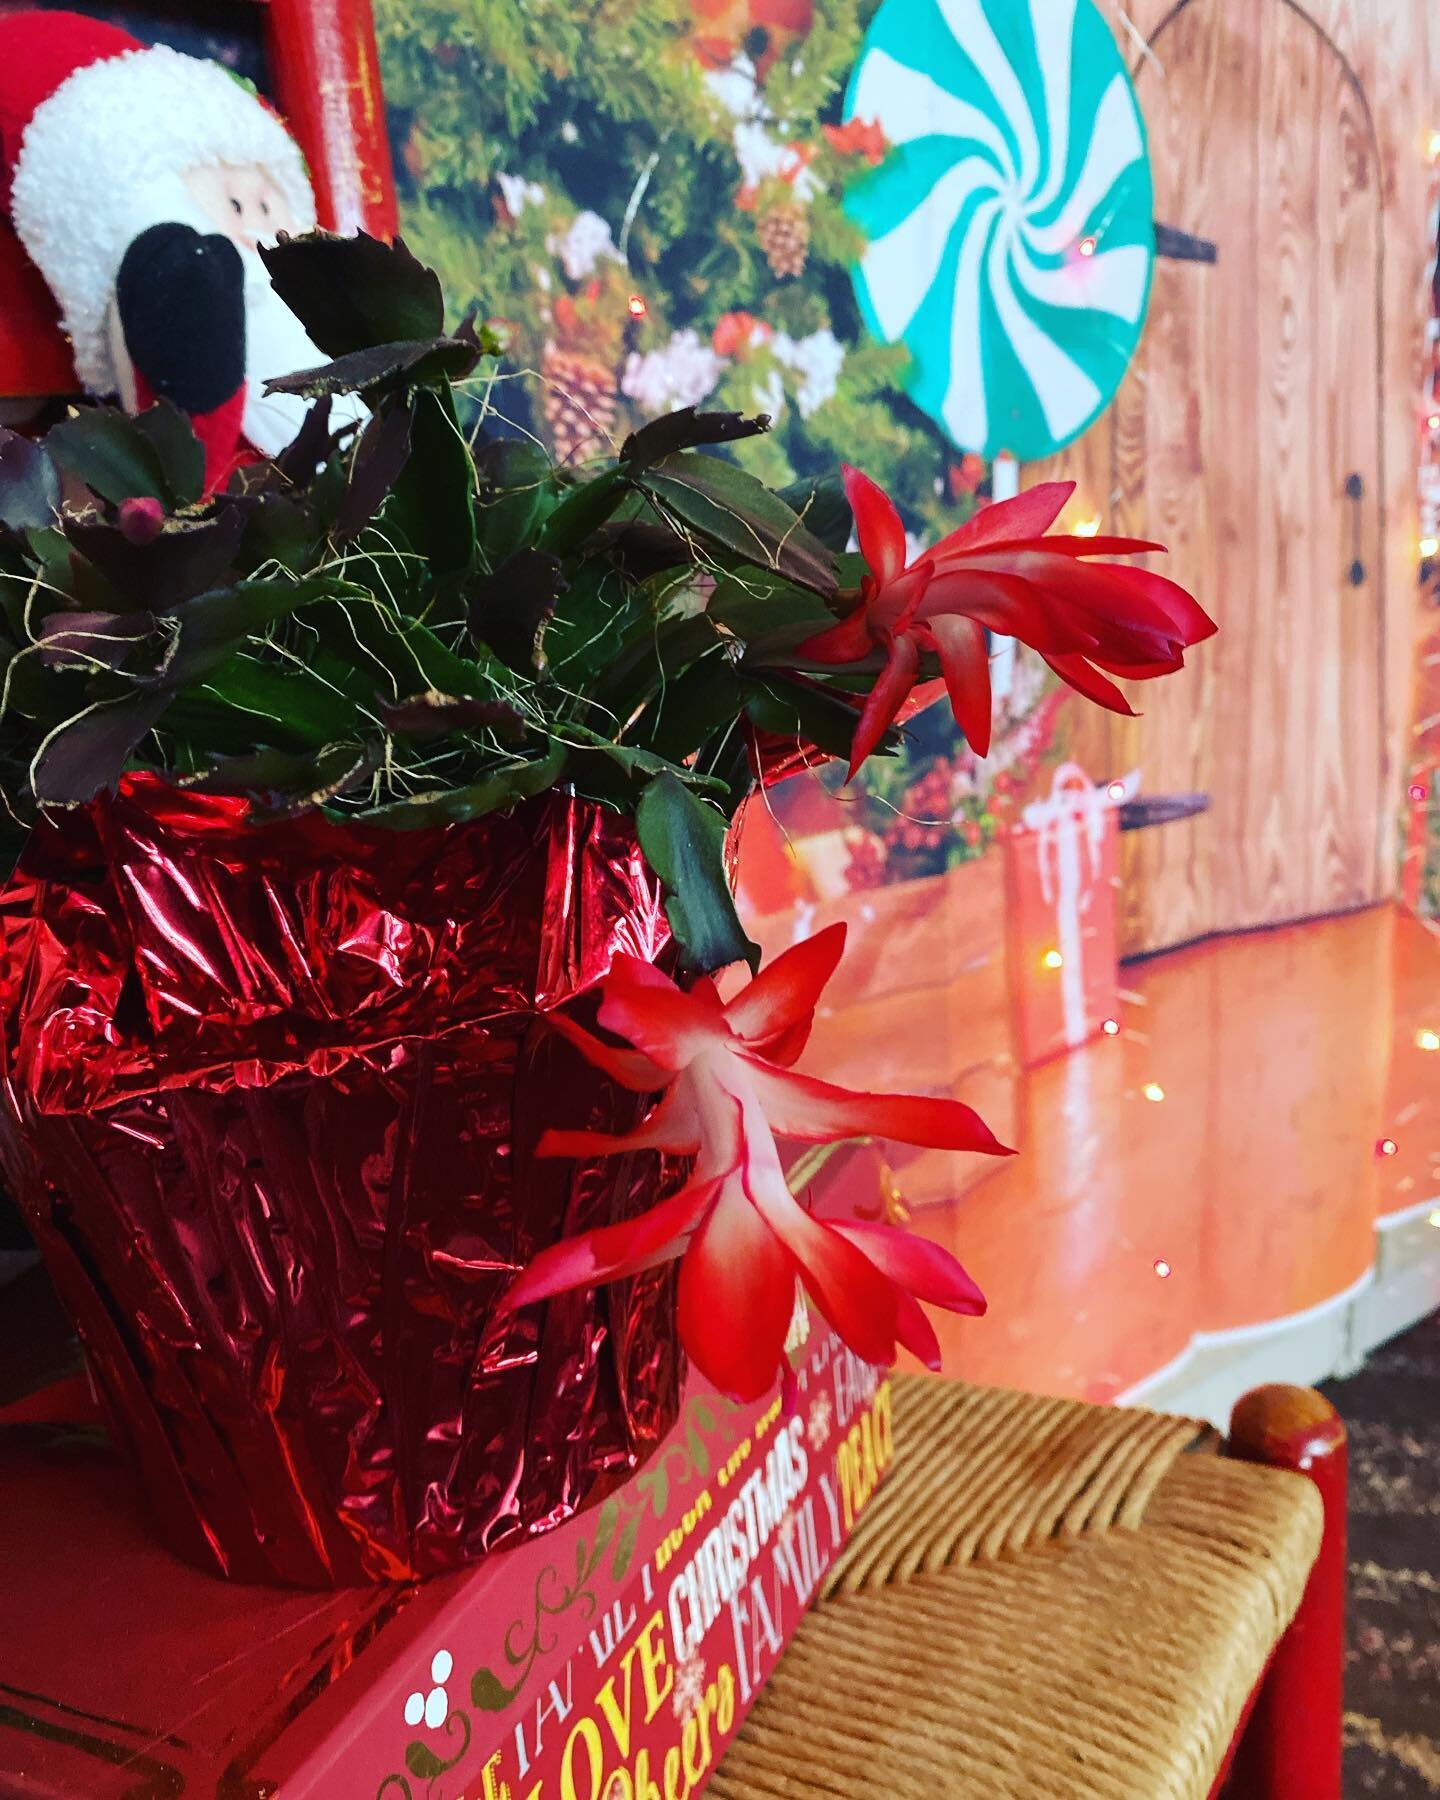 Last year one of our businesses gifted us this beautiful Christmas cactus, she is blooming again this year ❤️
Isn&rsquo;t she lovely!